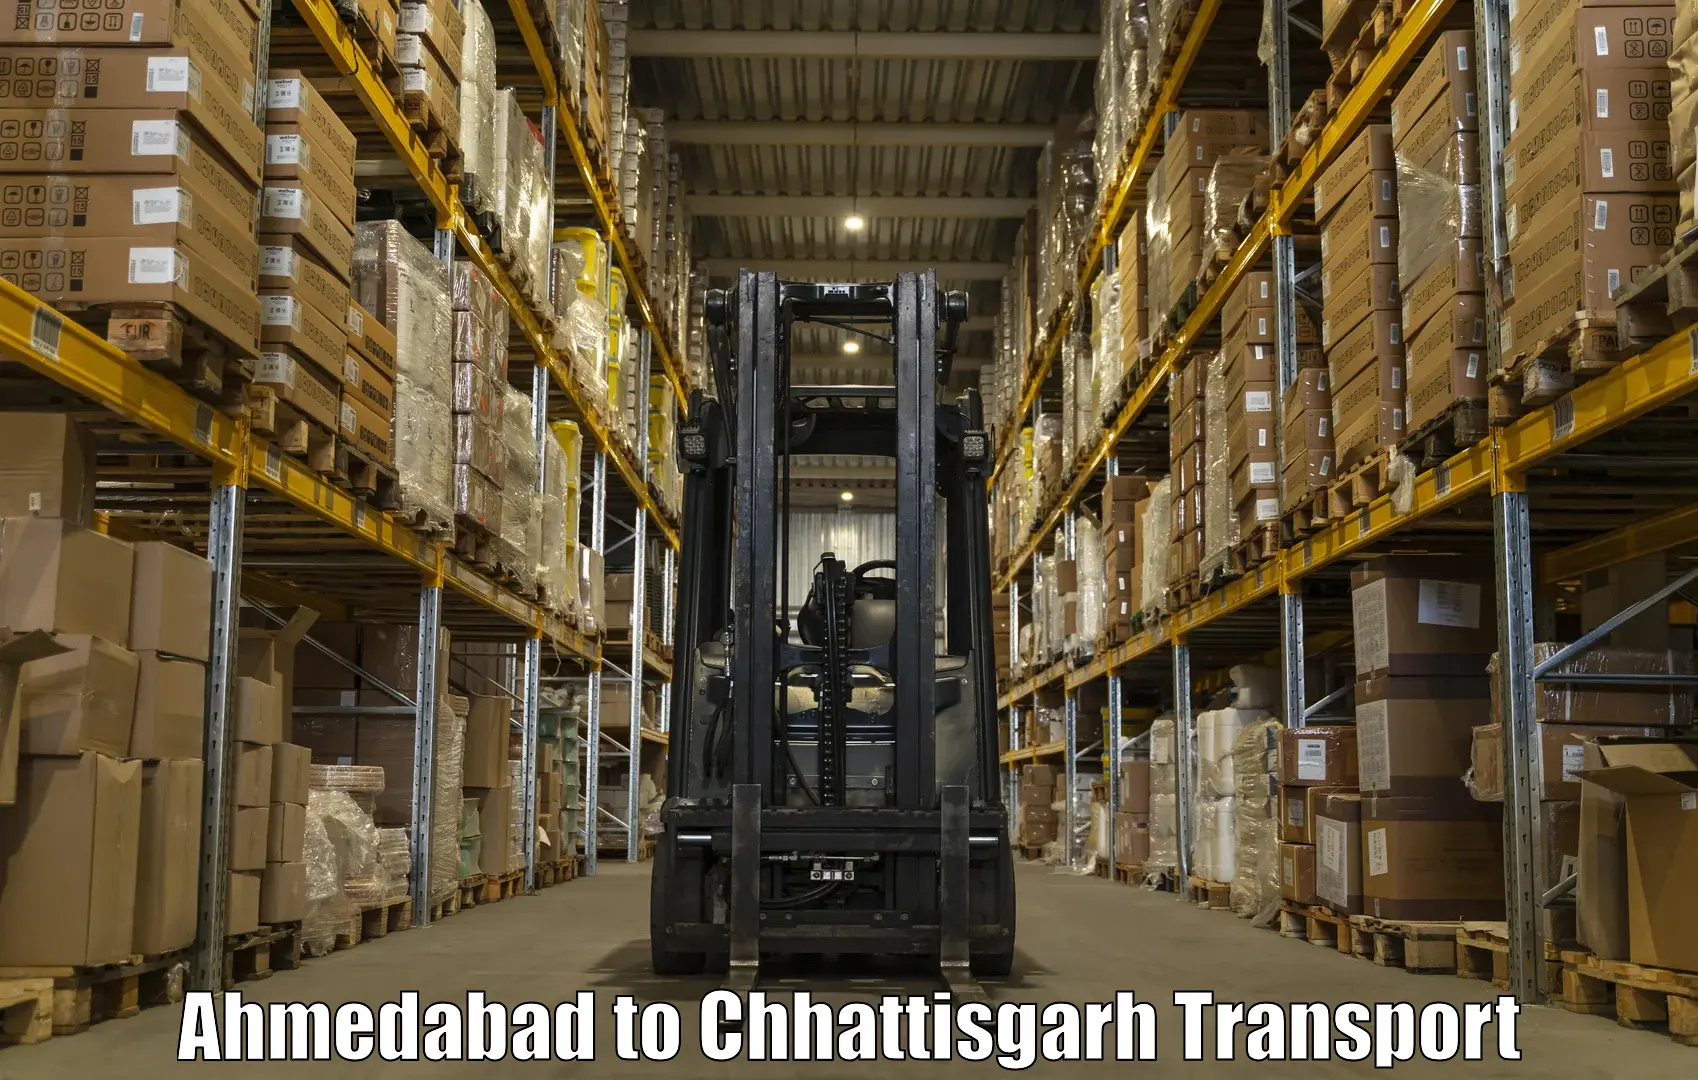 Express transport services in Ahmedabad to Dabhra